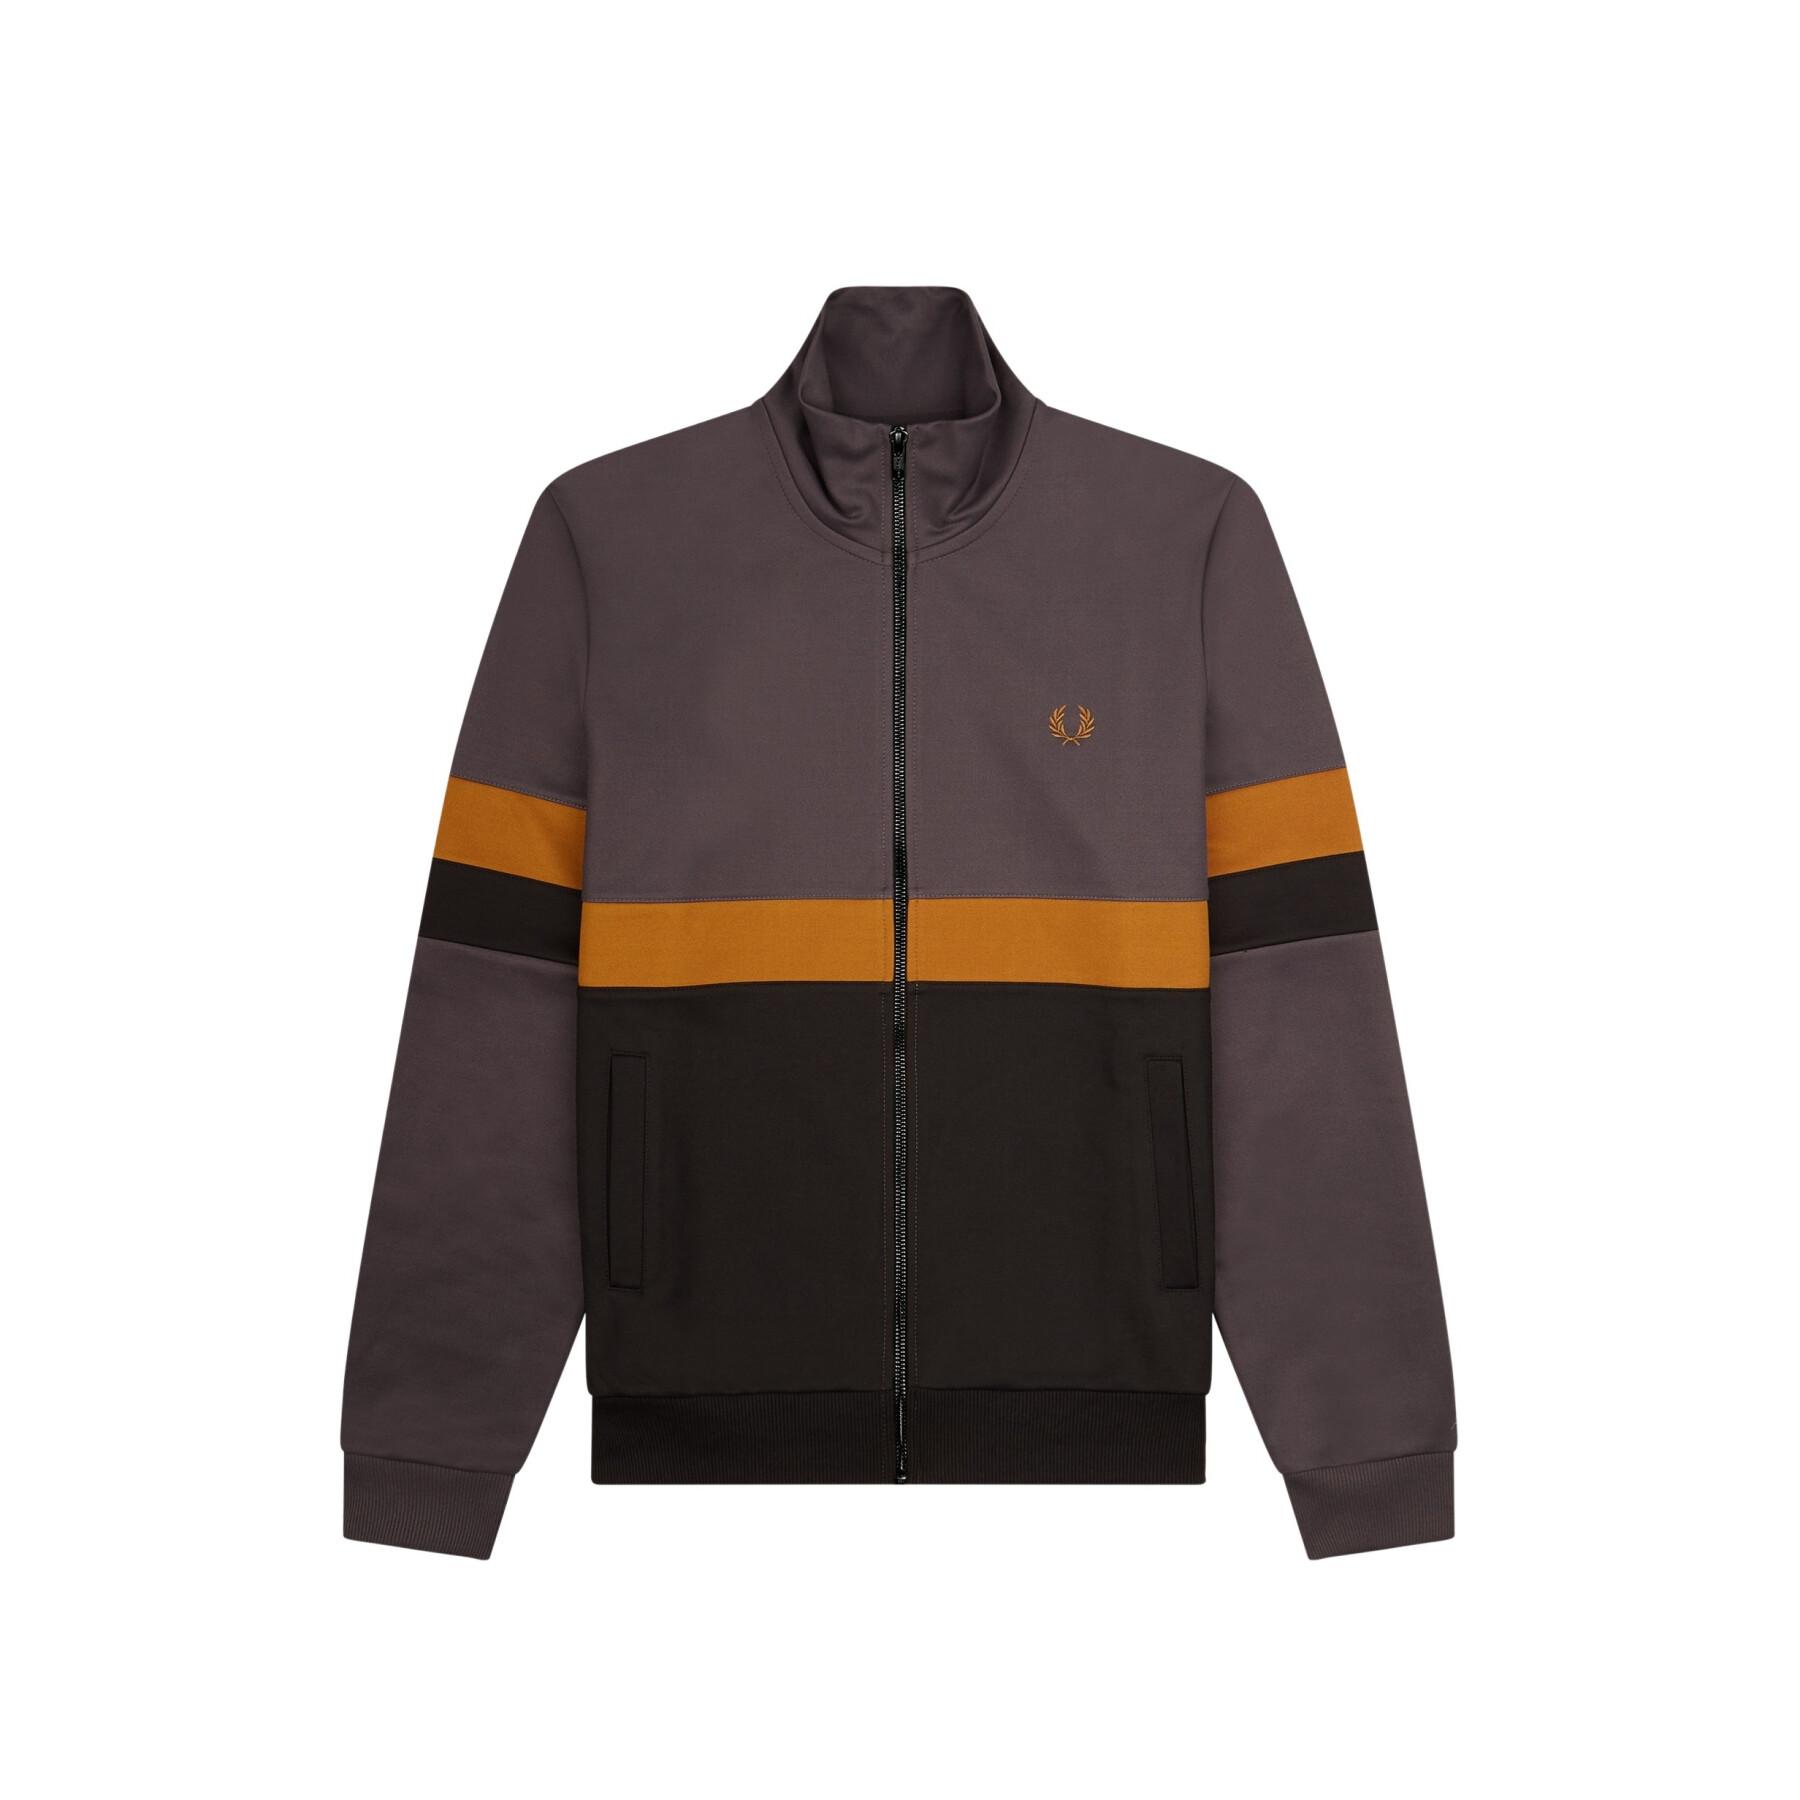 Trainingsjacke mit Bahnen Fred Perry